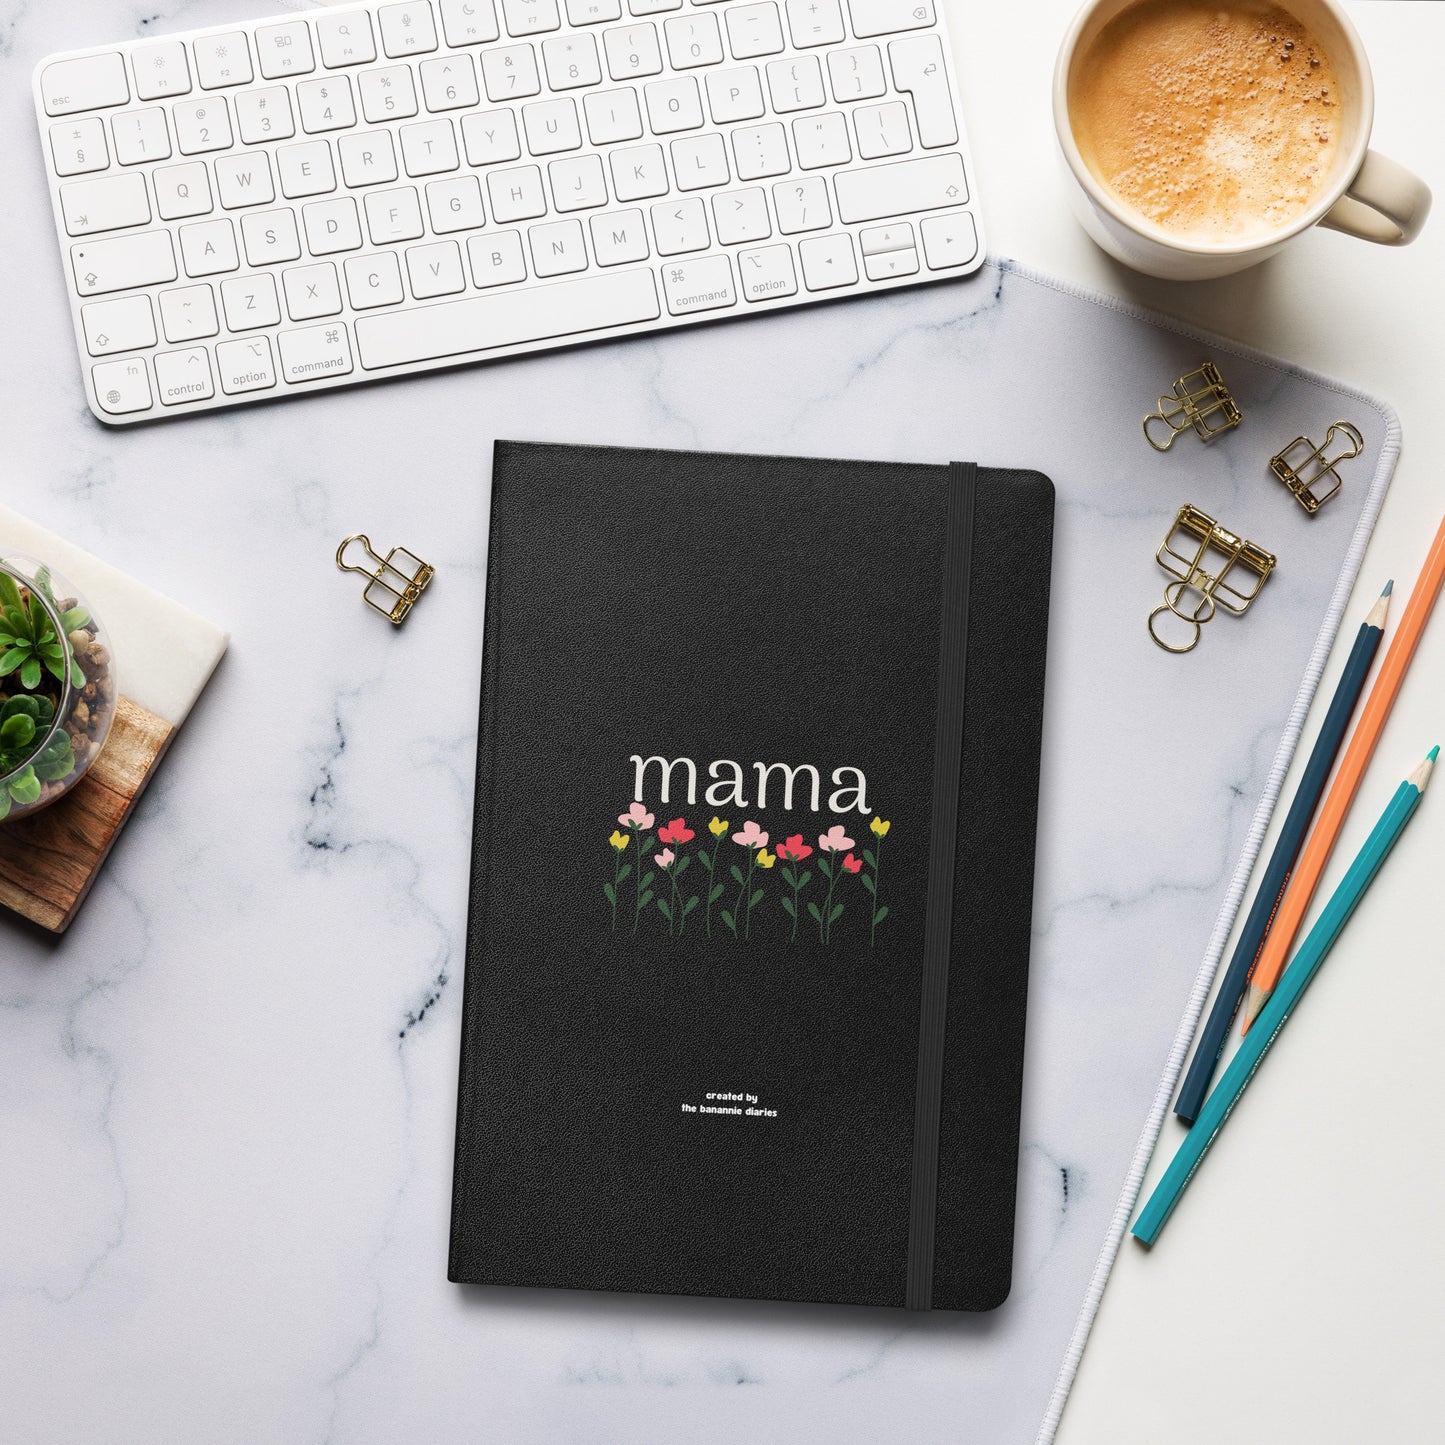 Mama - Hardcover Bound Notebook, 80 Pages, By The Banannie Diaries